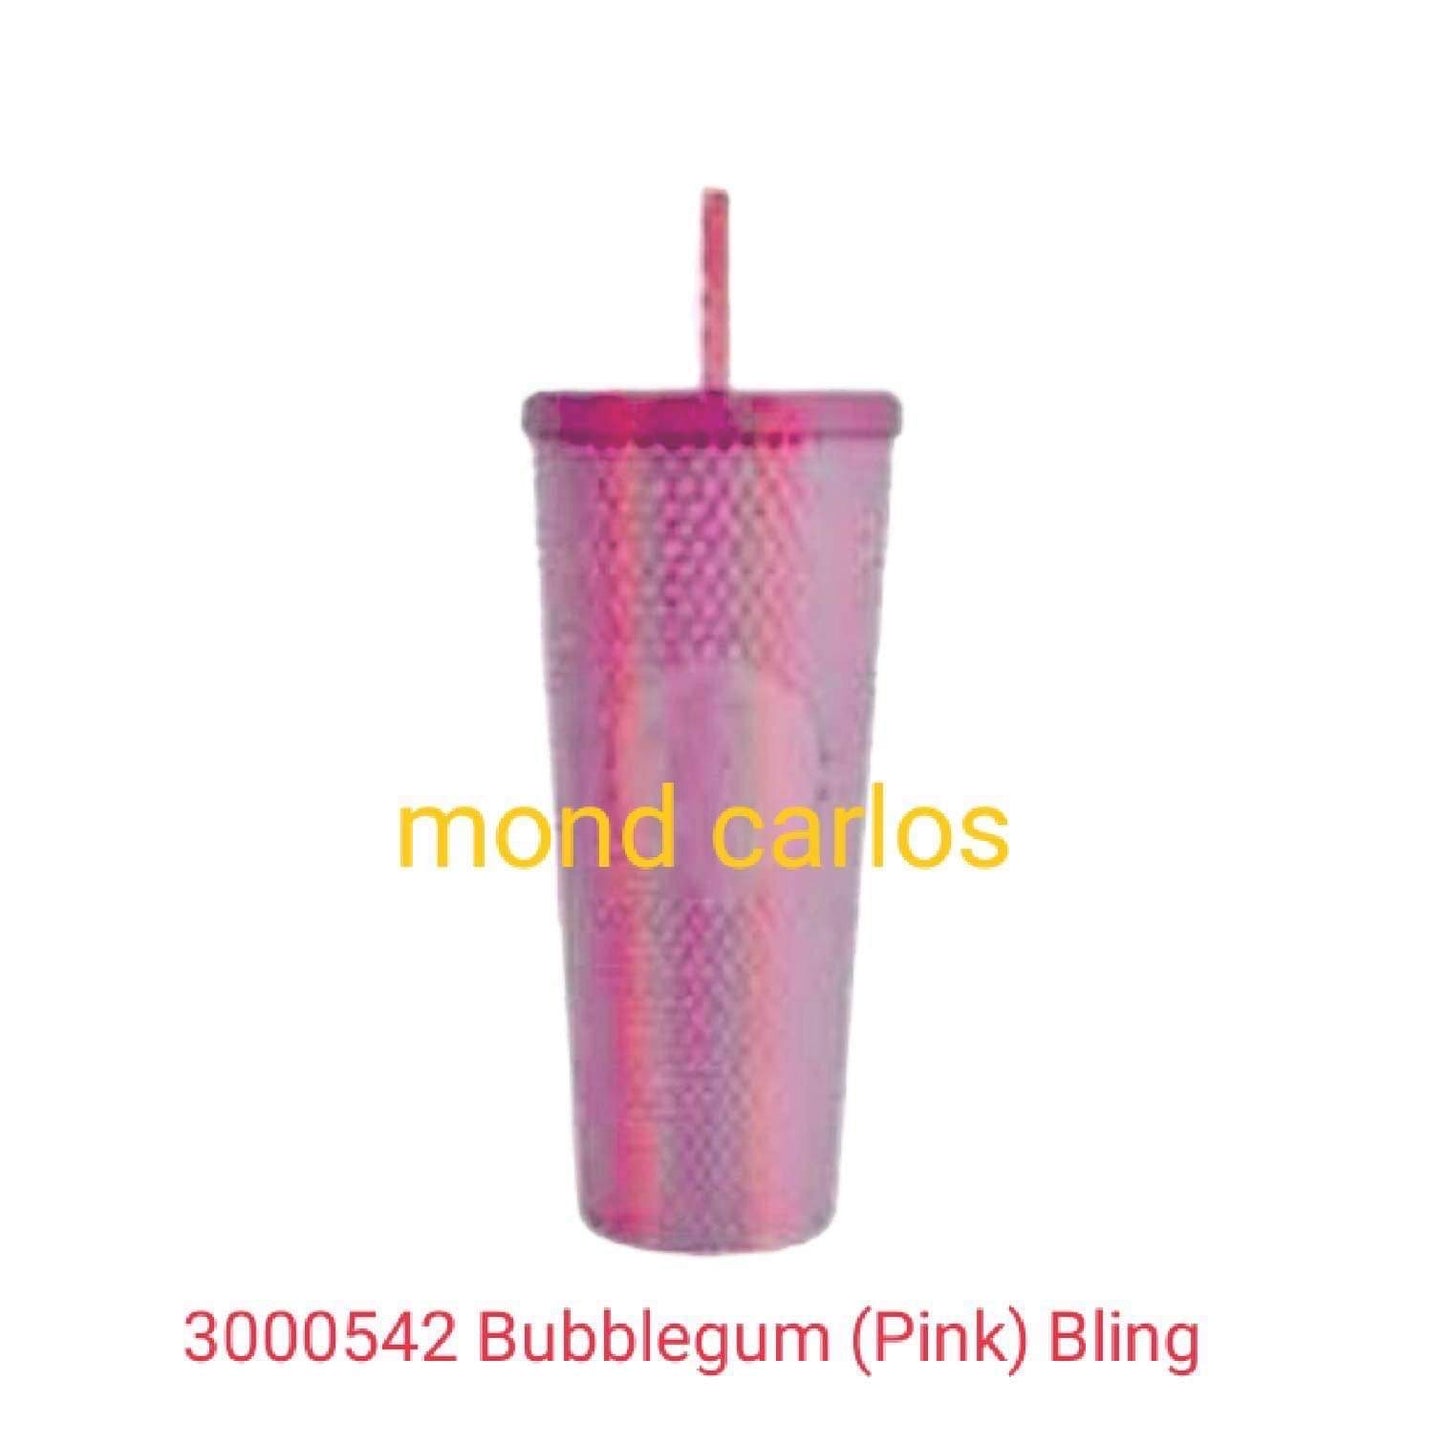 Bubble Gum Pink Bling Valentine’s - Philippines Exclusive